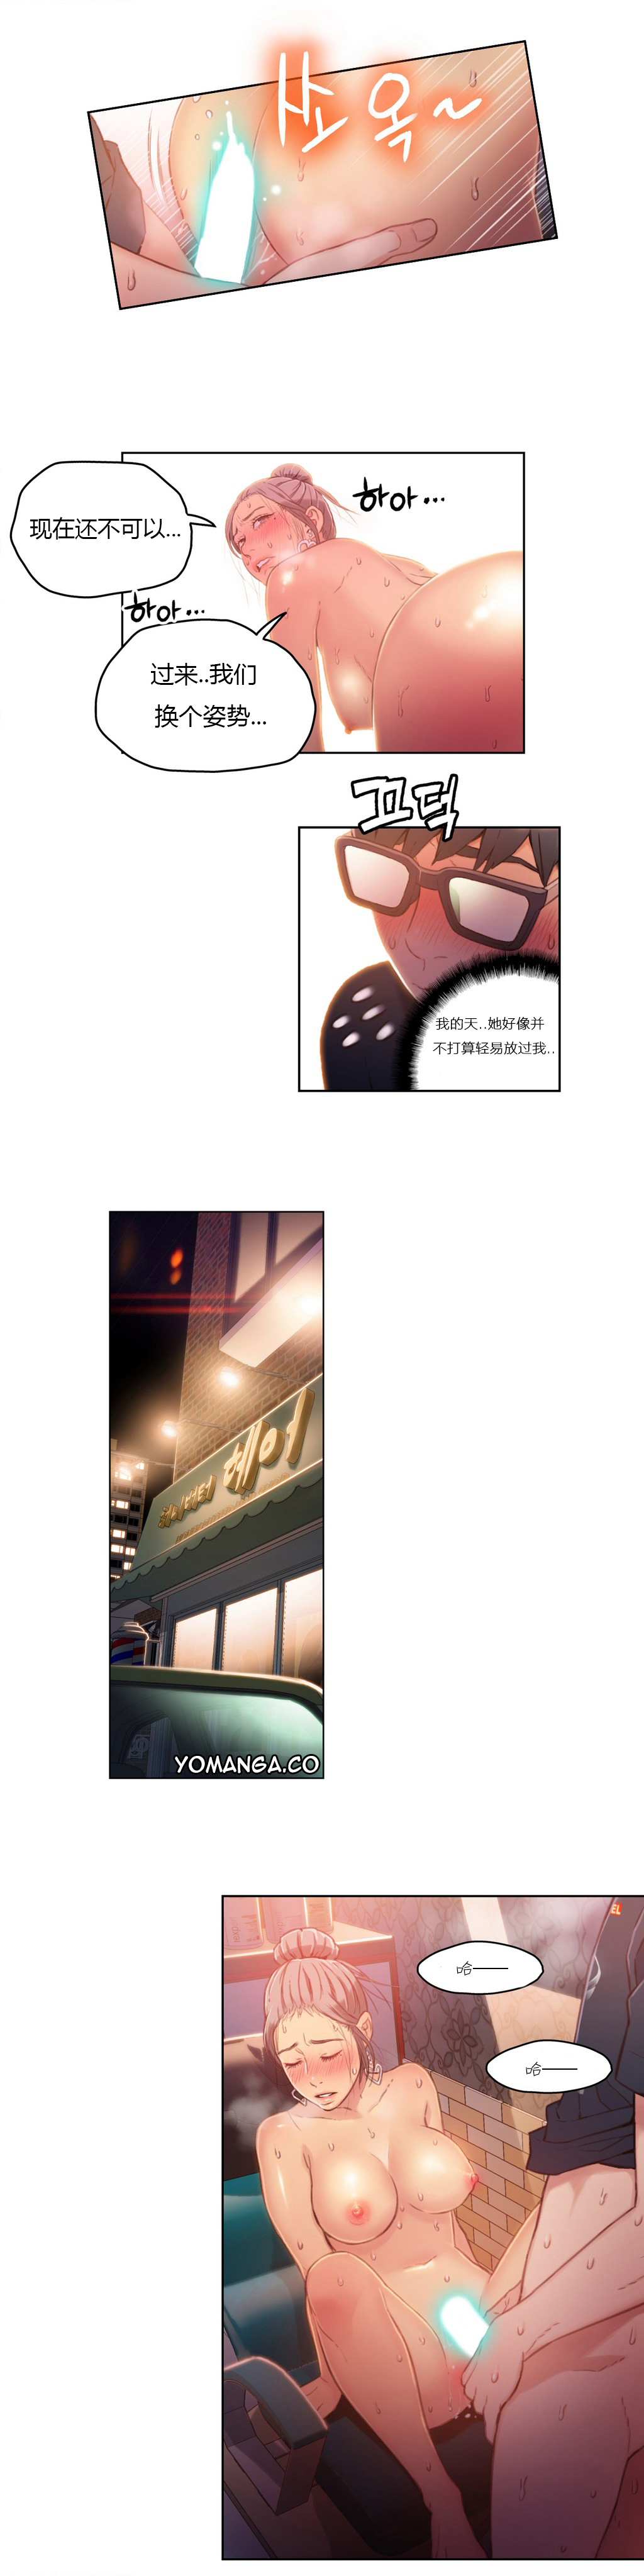 [Park Hyeongjun] Sweet Guy Ch.22-30 (Chinese) page 13 full